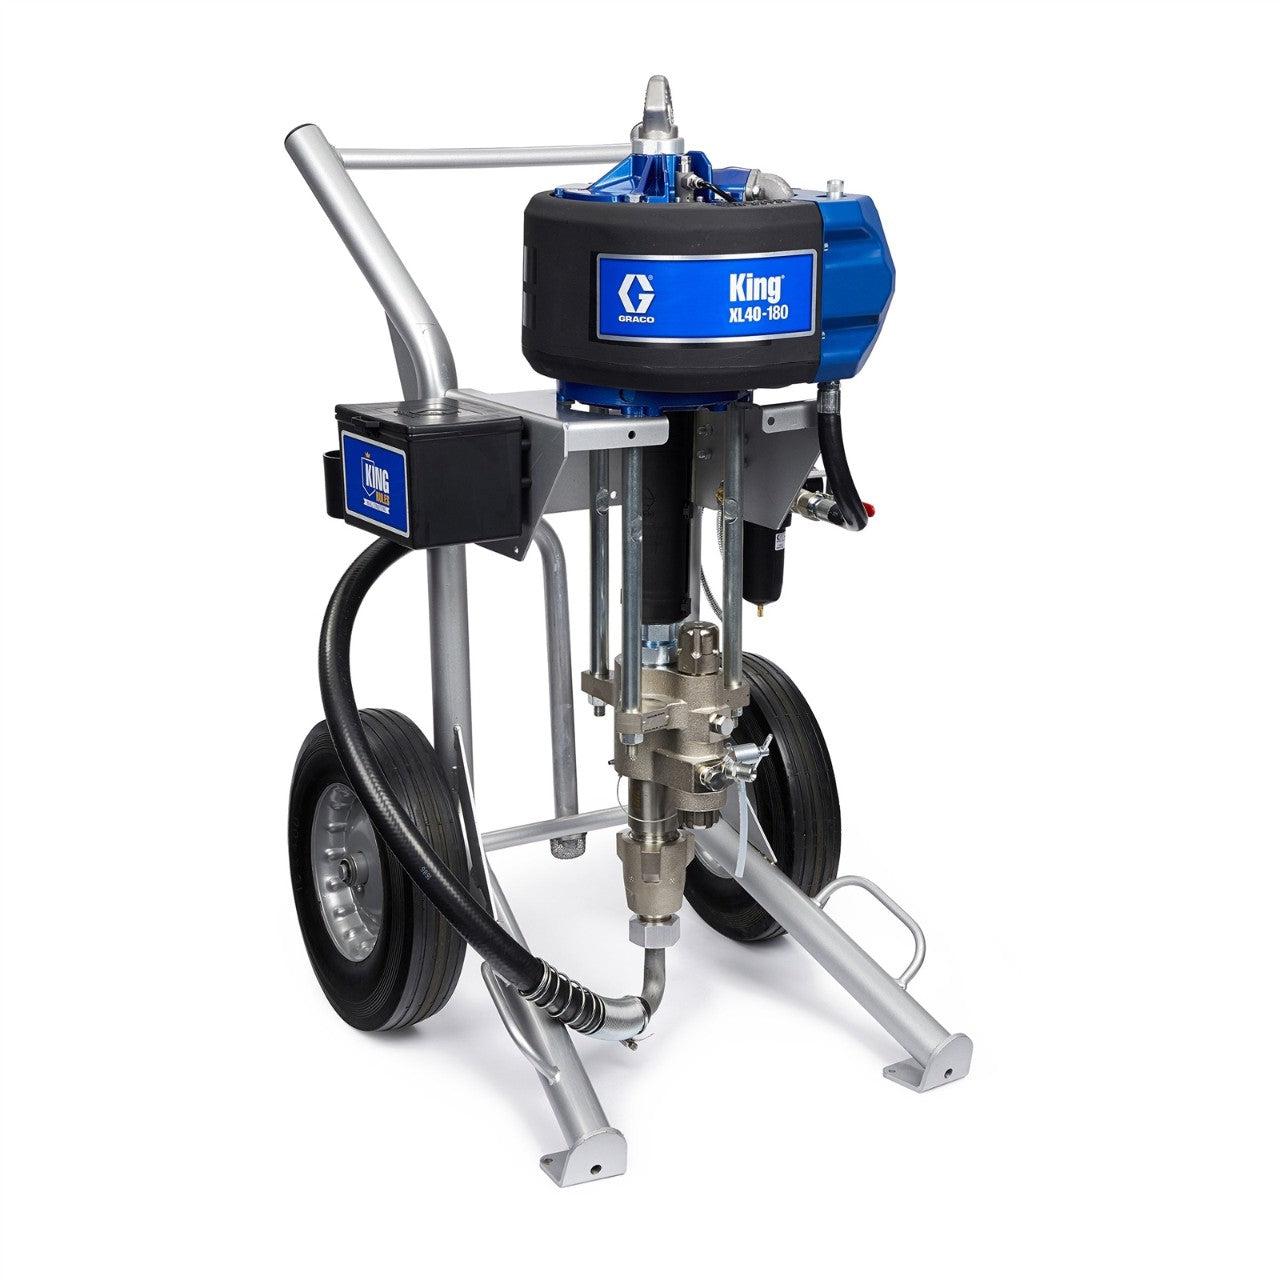 Heavy-Duty Cart Mounted AA Spray Package with 40:1 Mix Ratio and XL Air Motor with DataTrak